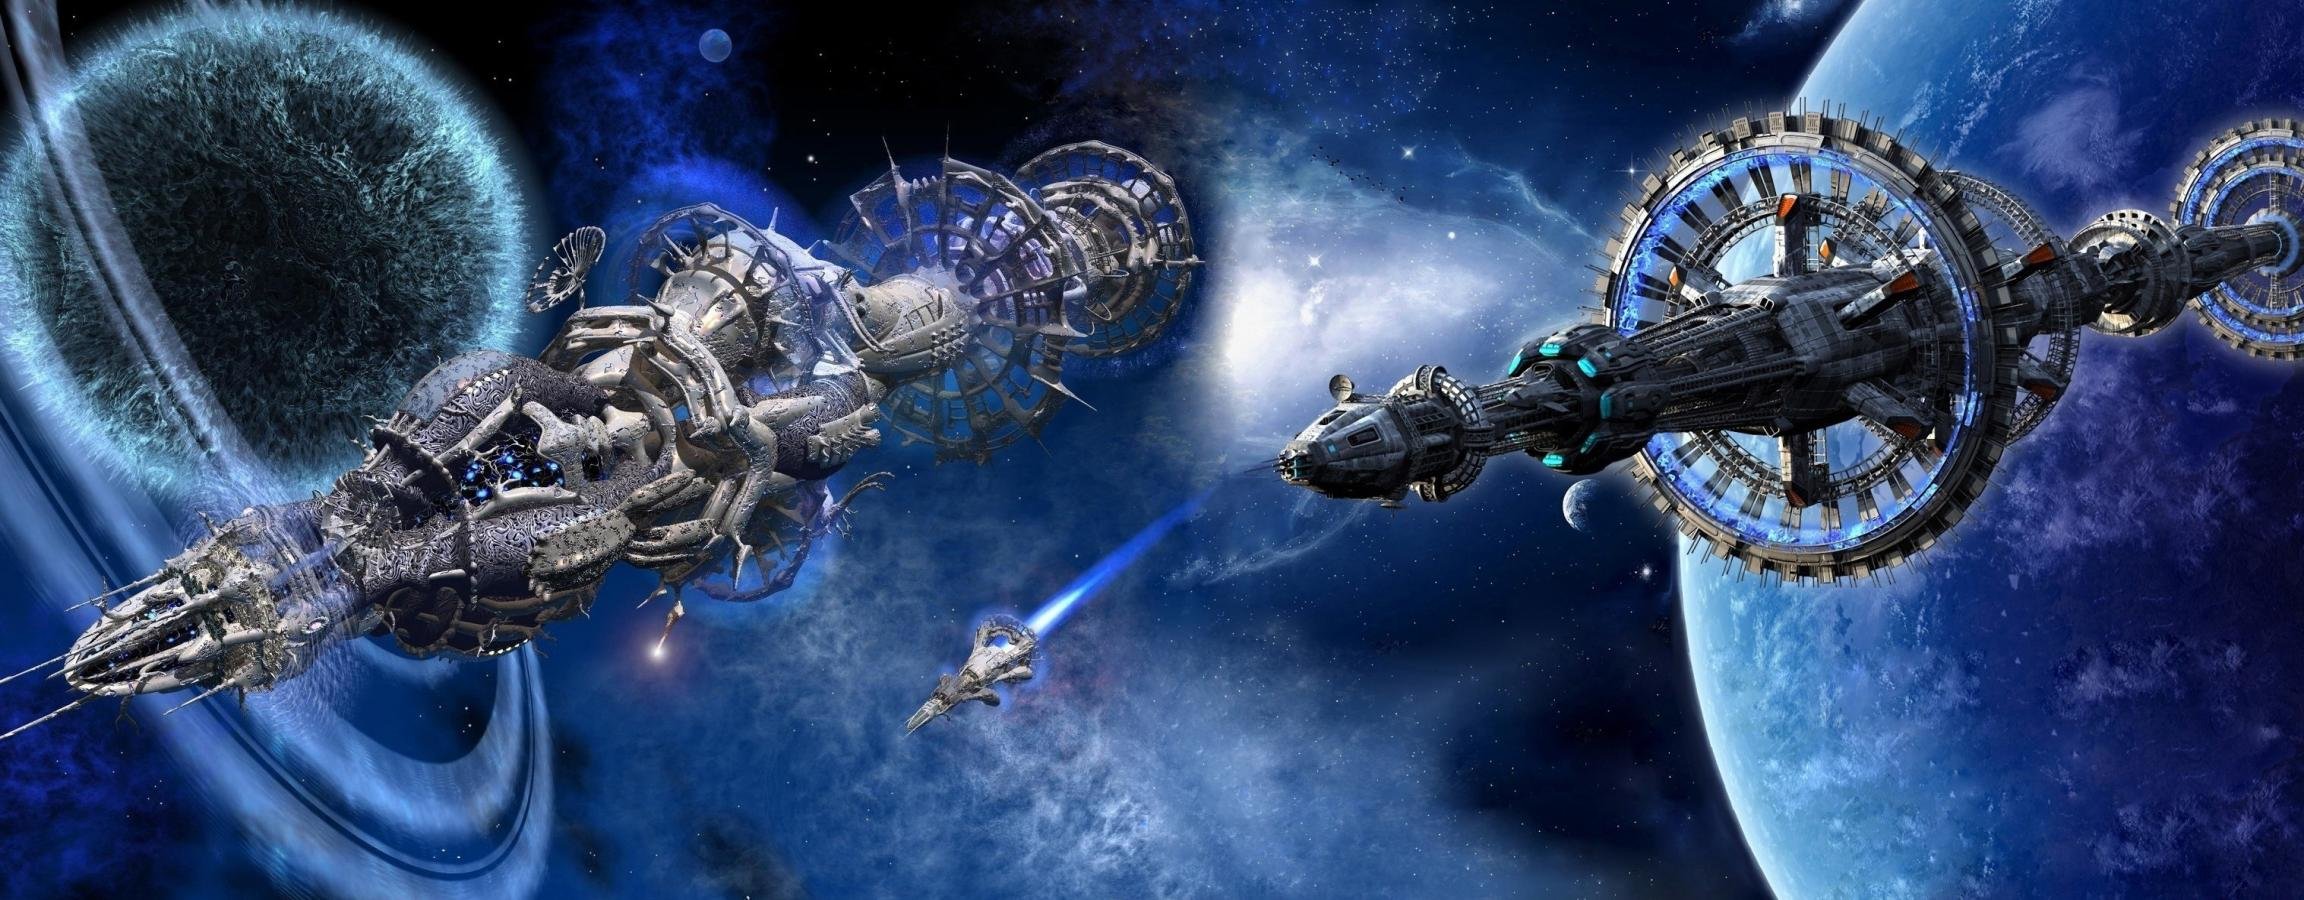 Download dual monitor 2304x900 Spaceship PC wallpaper ID:183857 for free